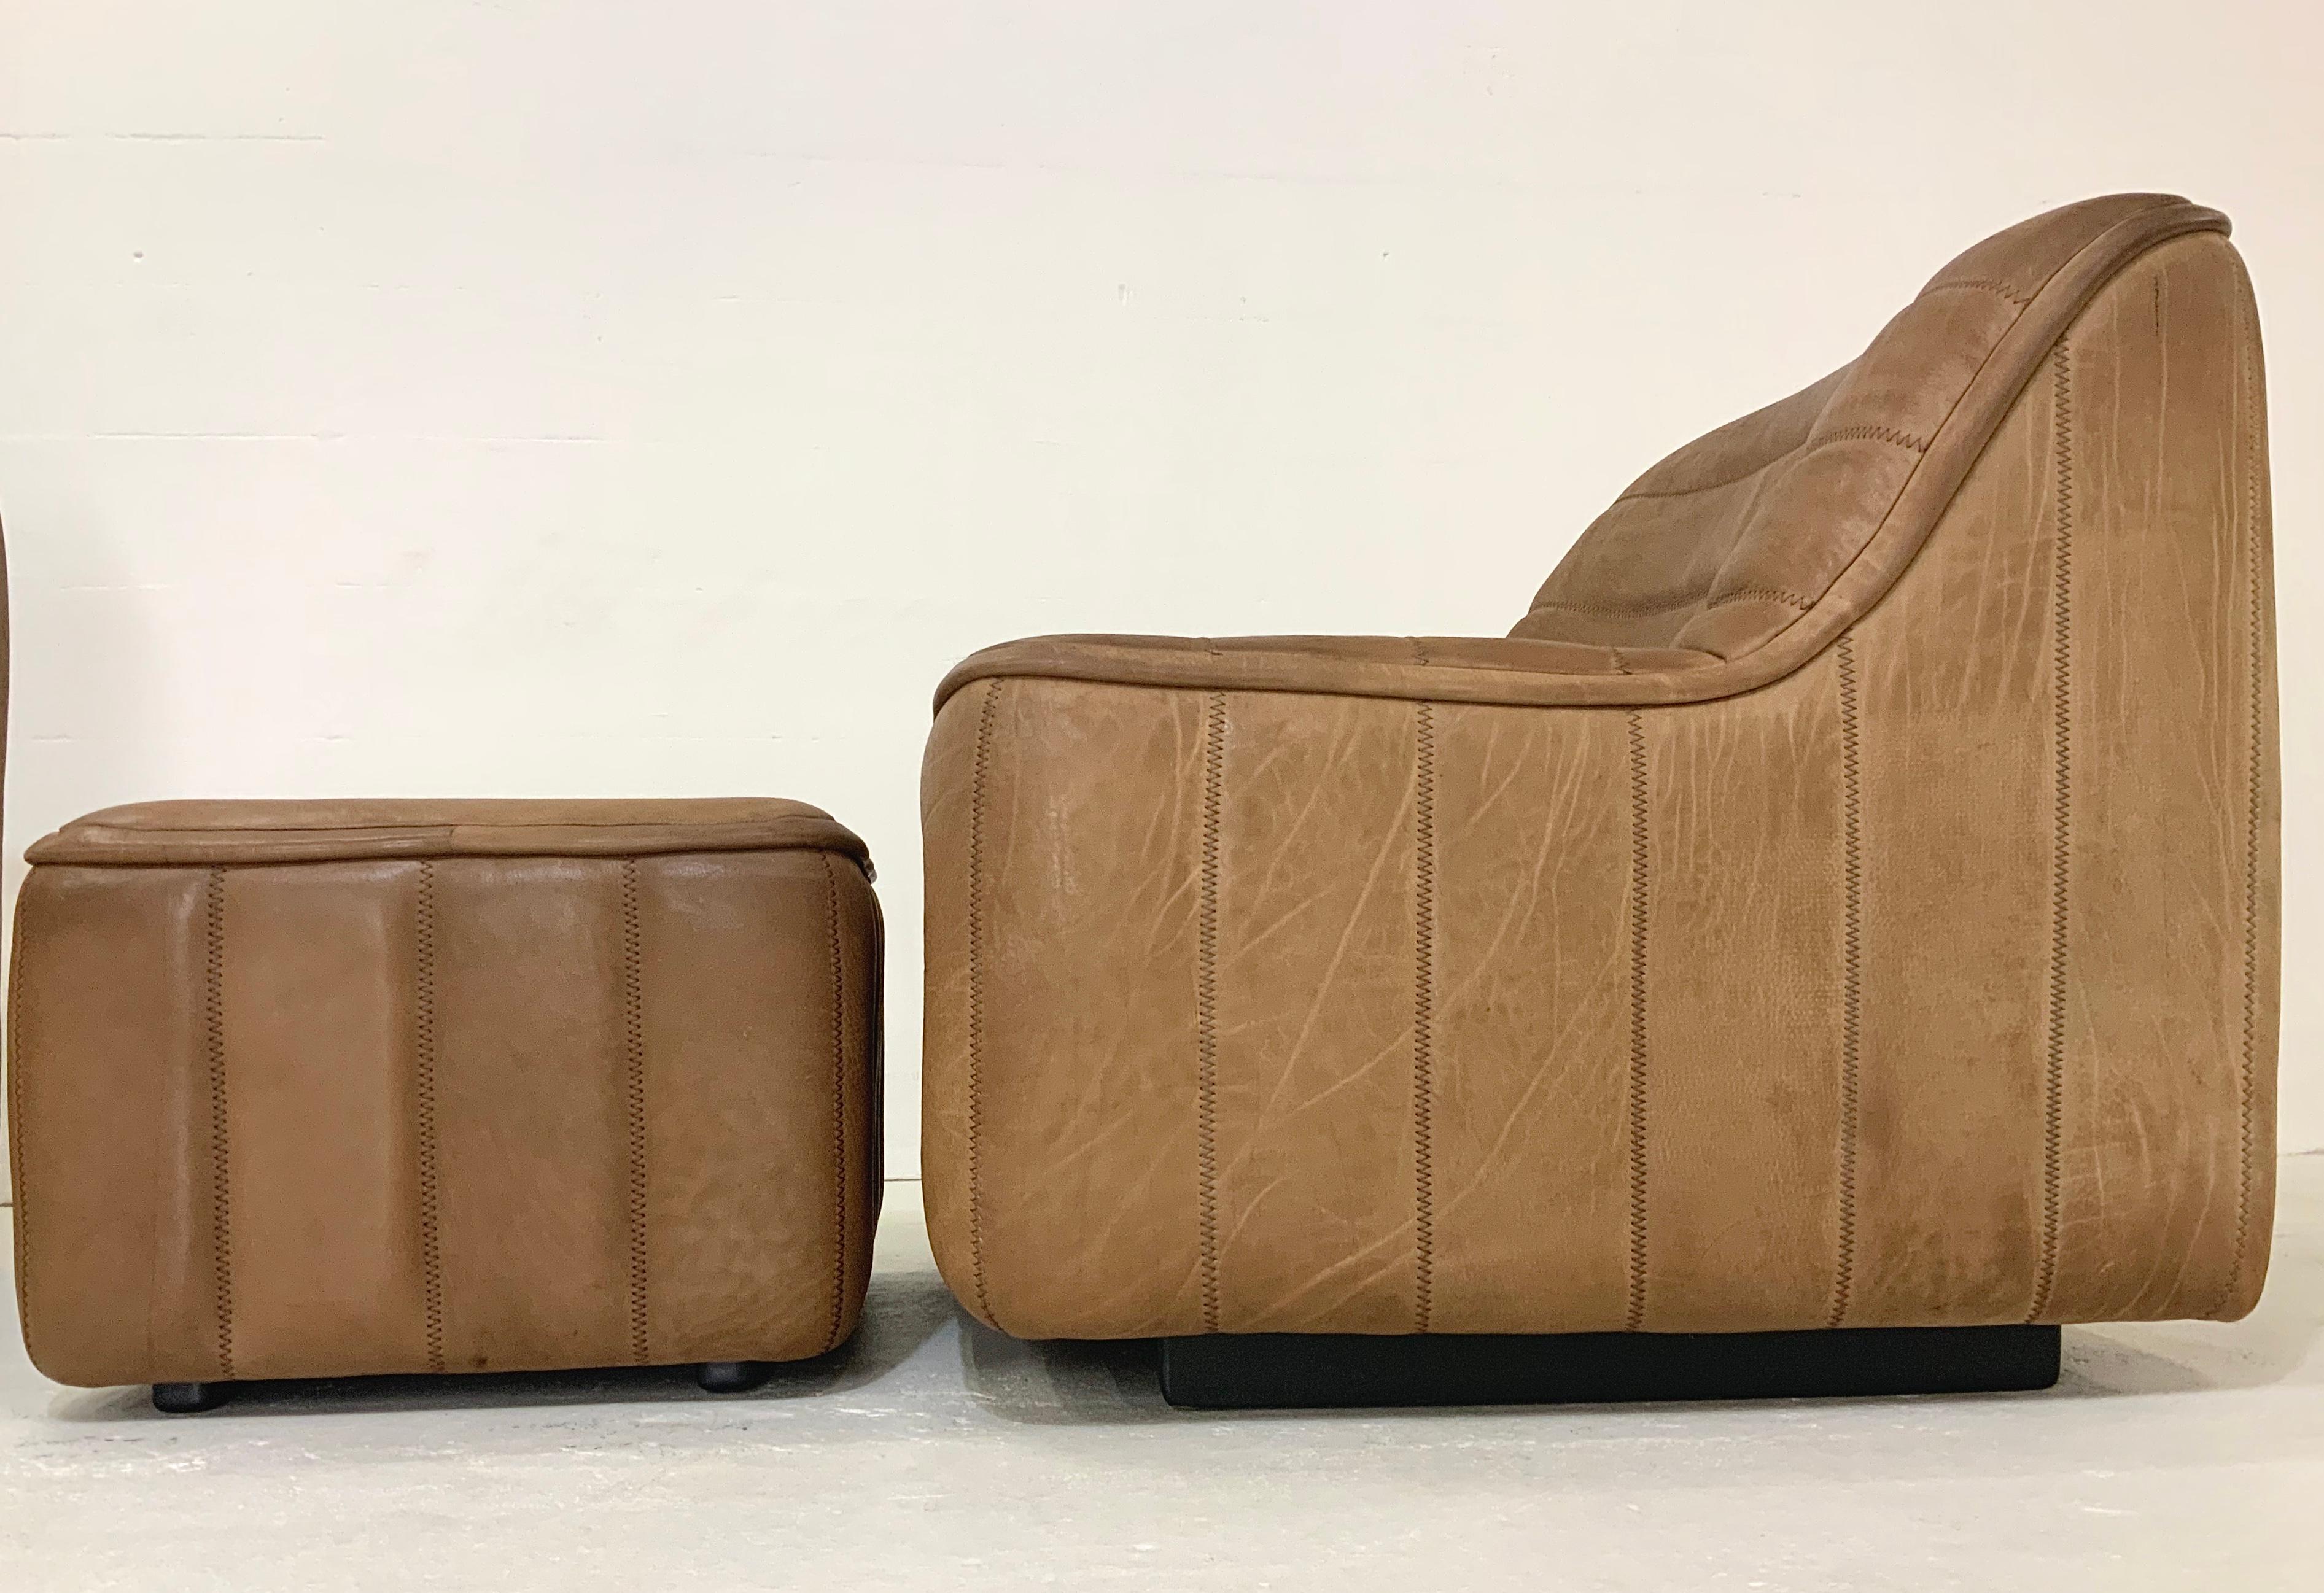 The vintage DS-84 model is a coveted and very rare design classic - specially the ottoman is very, very rare to get - designed in the midcentury era in early 1970s, by the renowned leather craftsman manufacturer in Switzerland the luxury
brand De